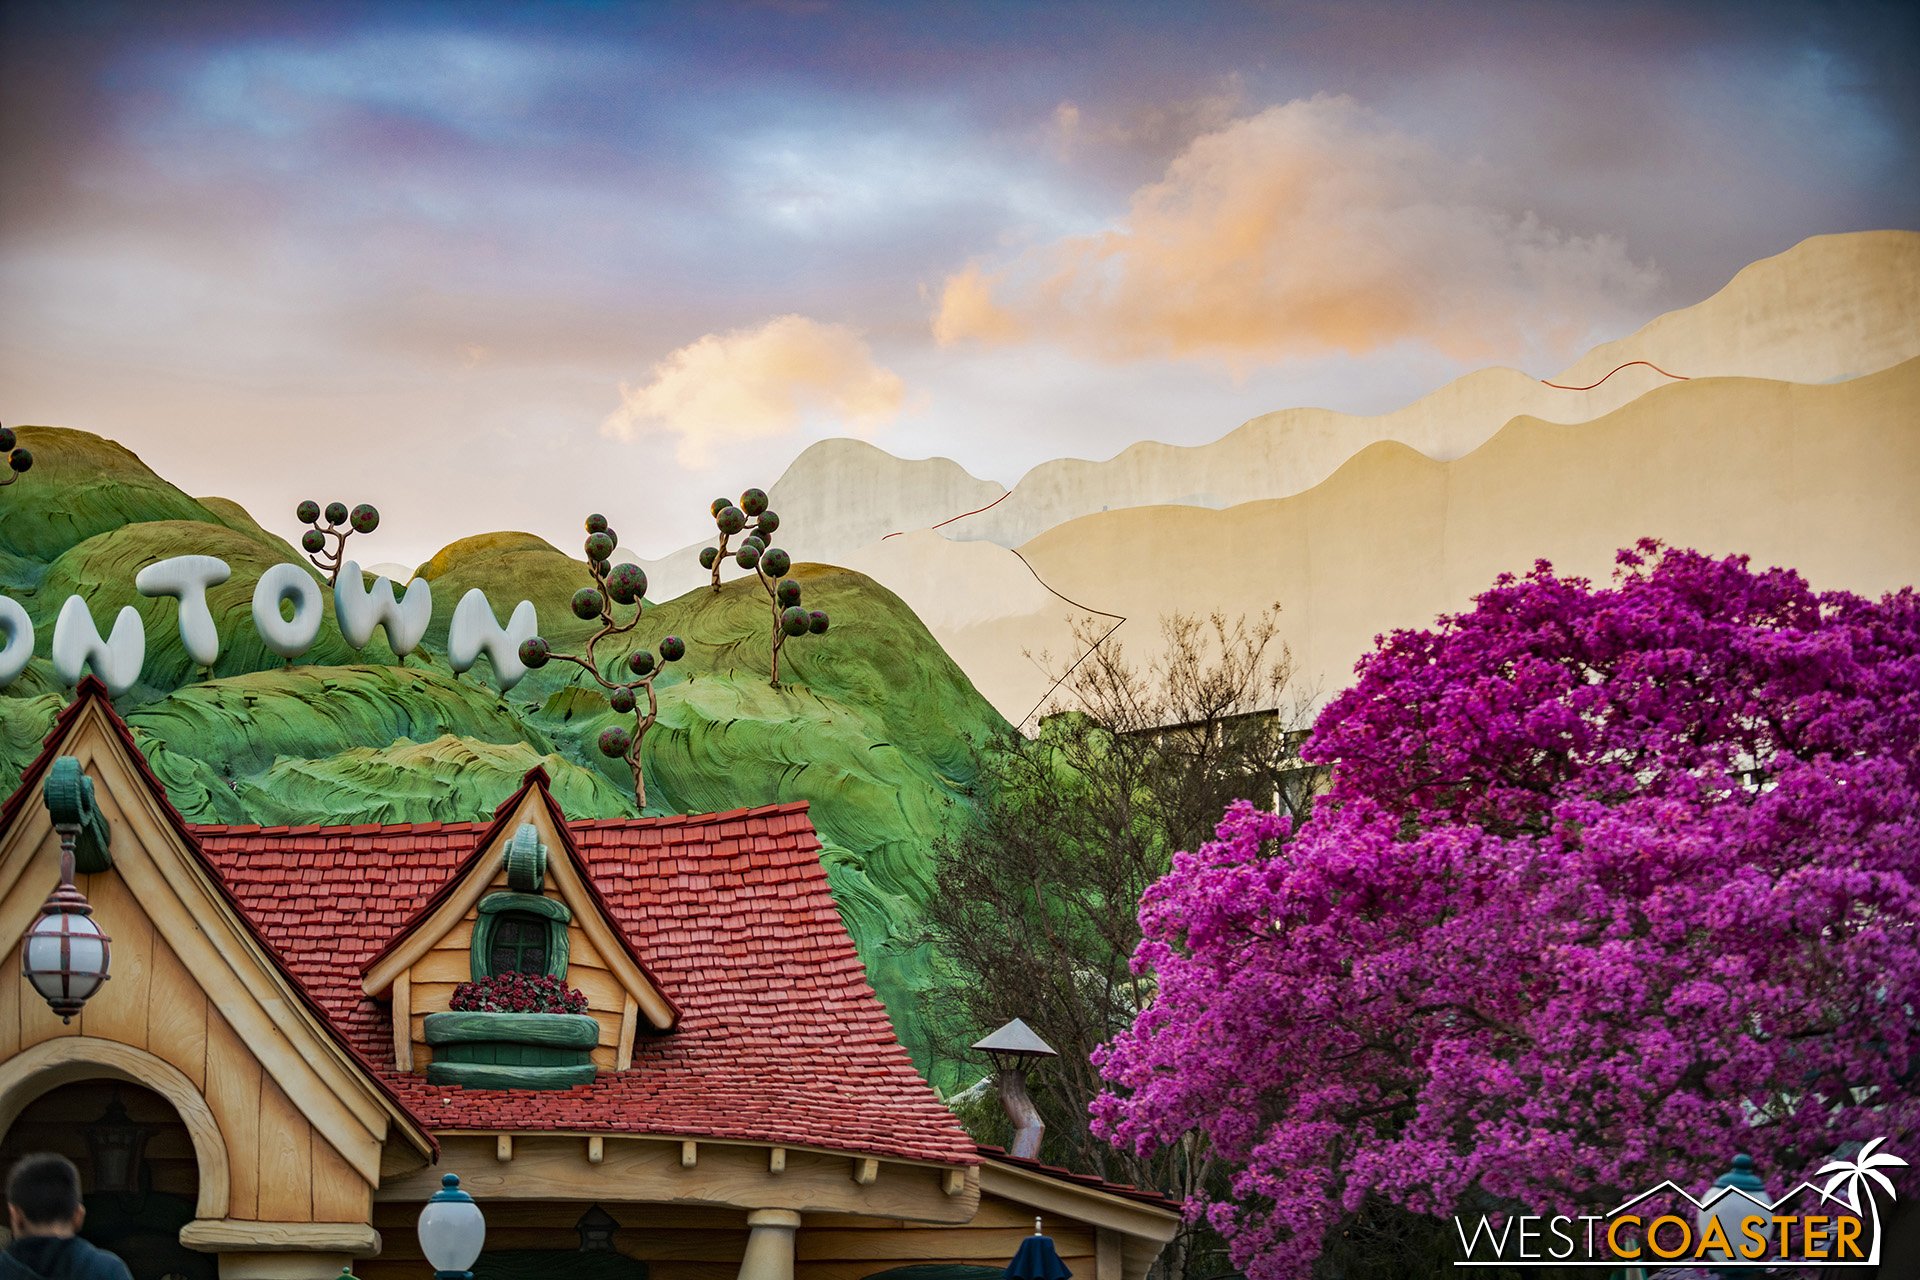  This juxtaposition next to the original Toontown rolling hills gives an idea of what the final product will look like. 